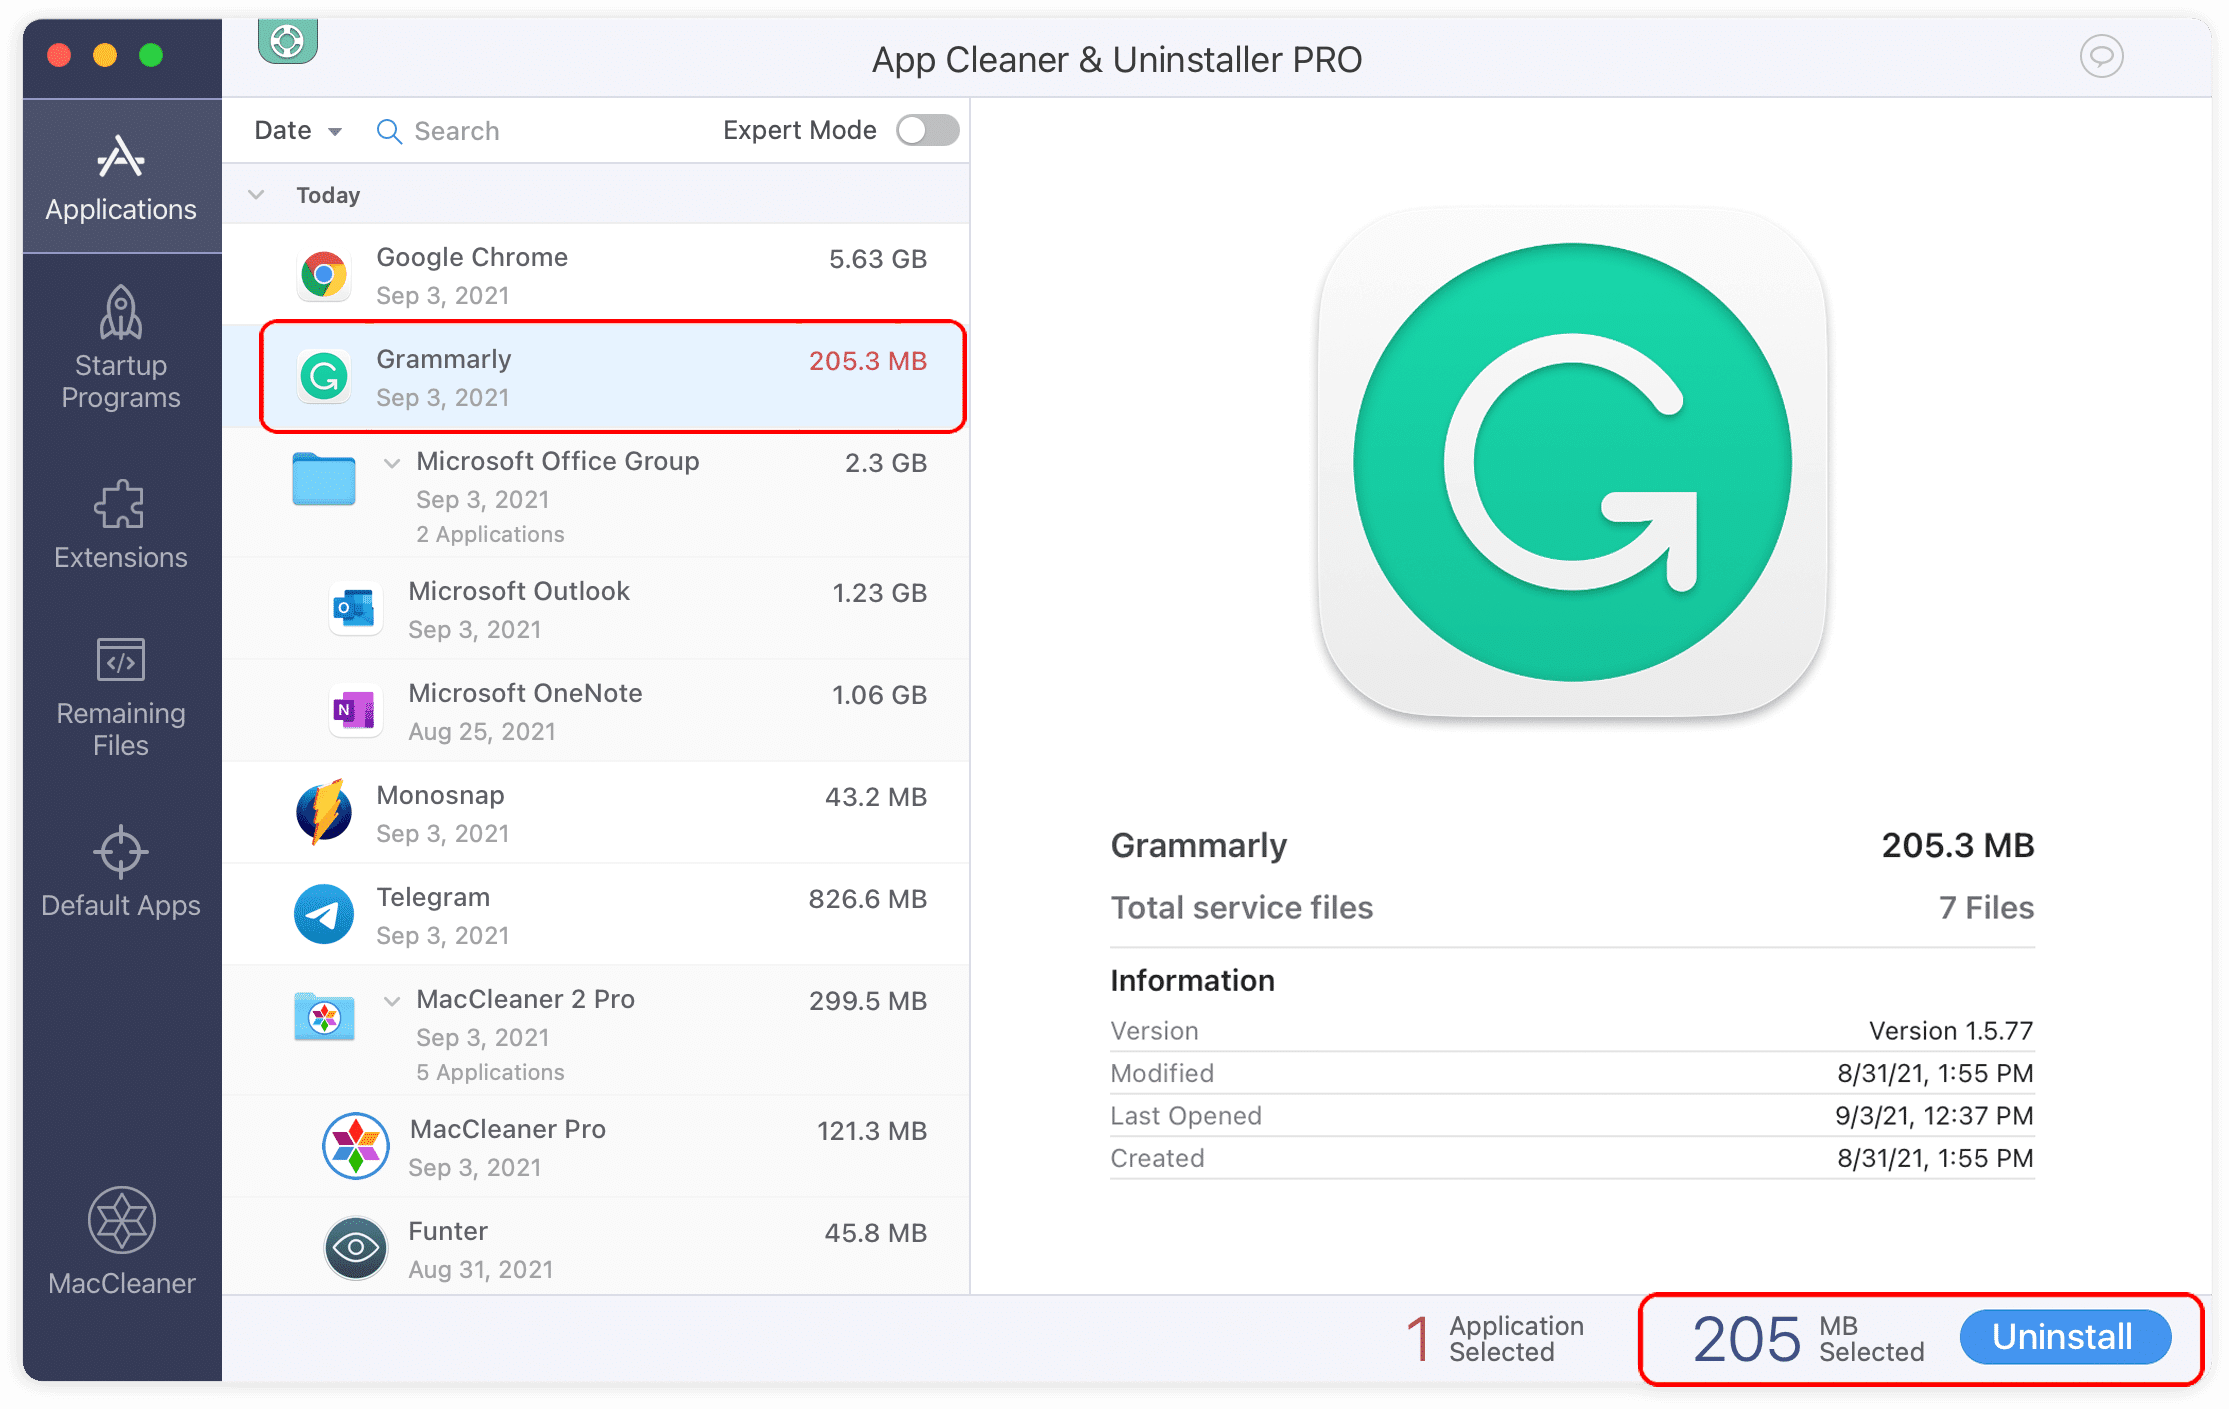 removing Grammarly with App Cleaner & Uninstaller